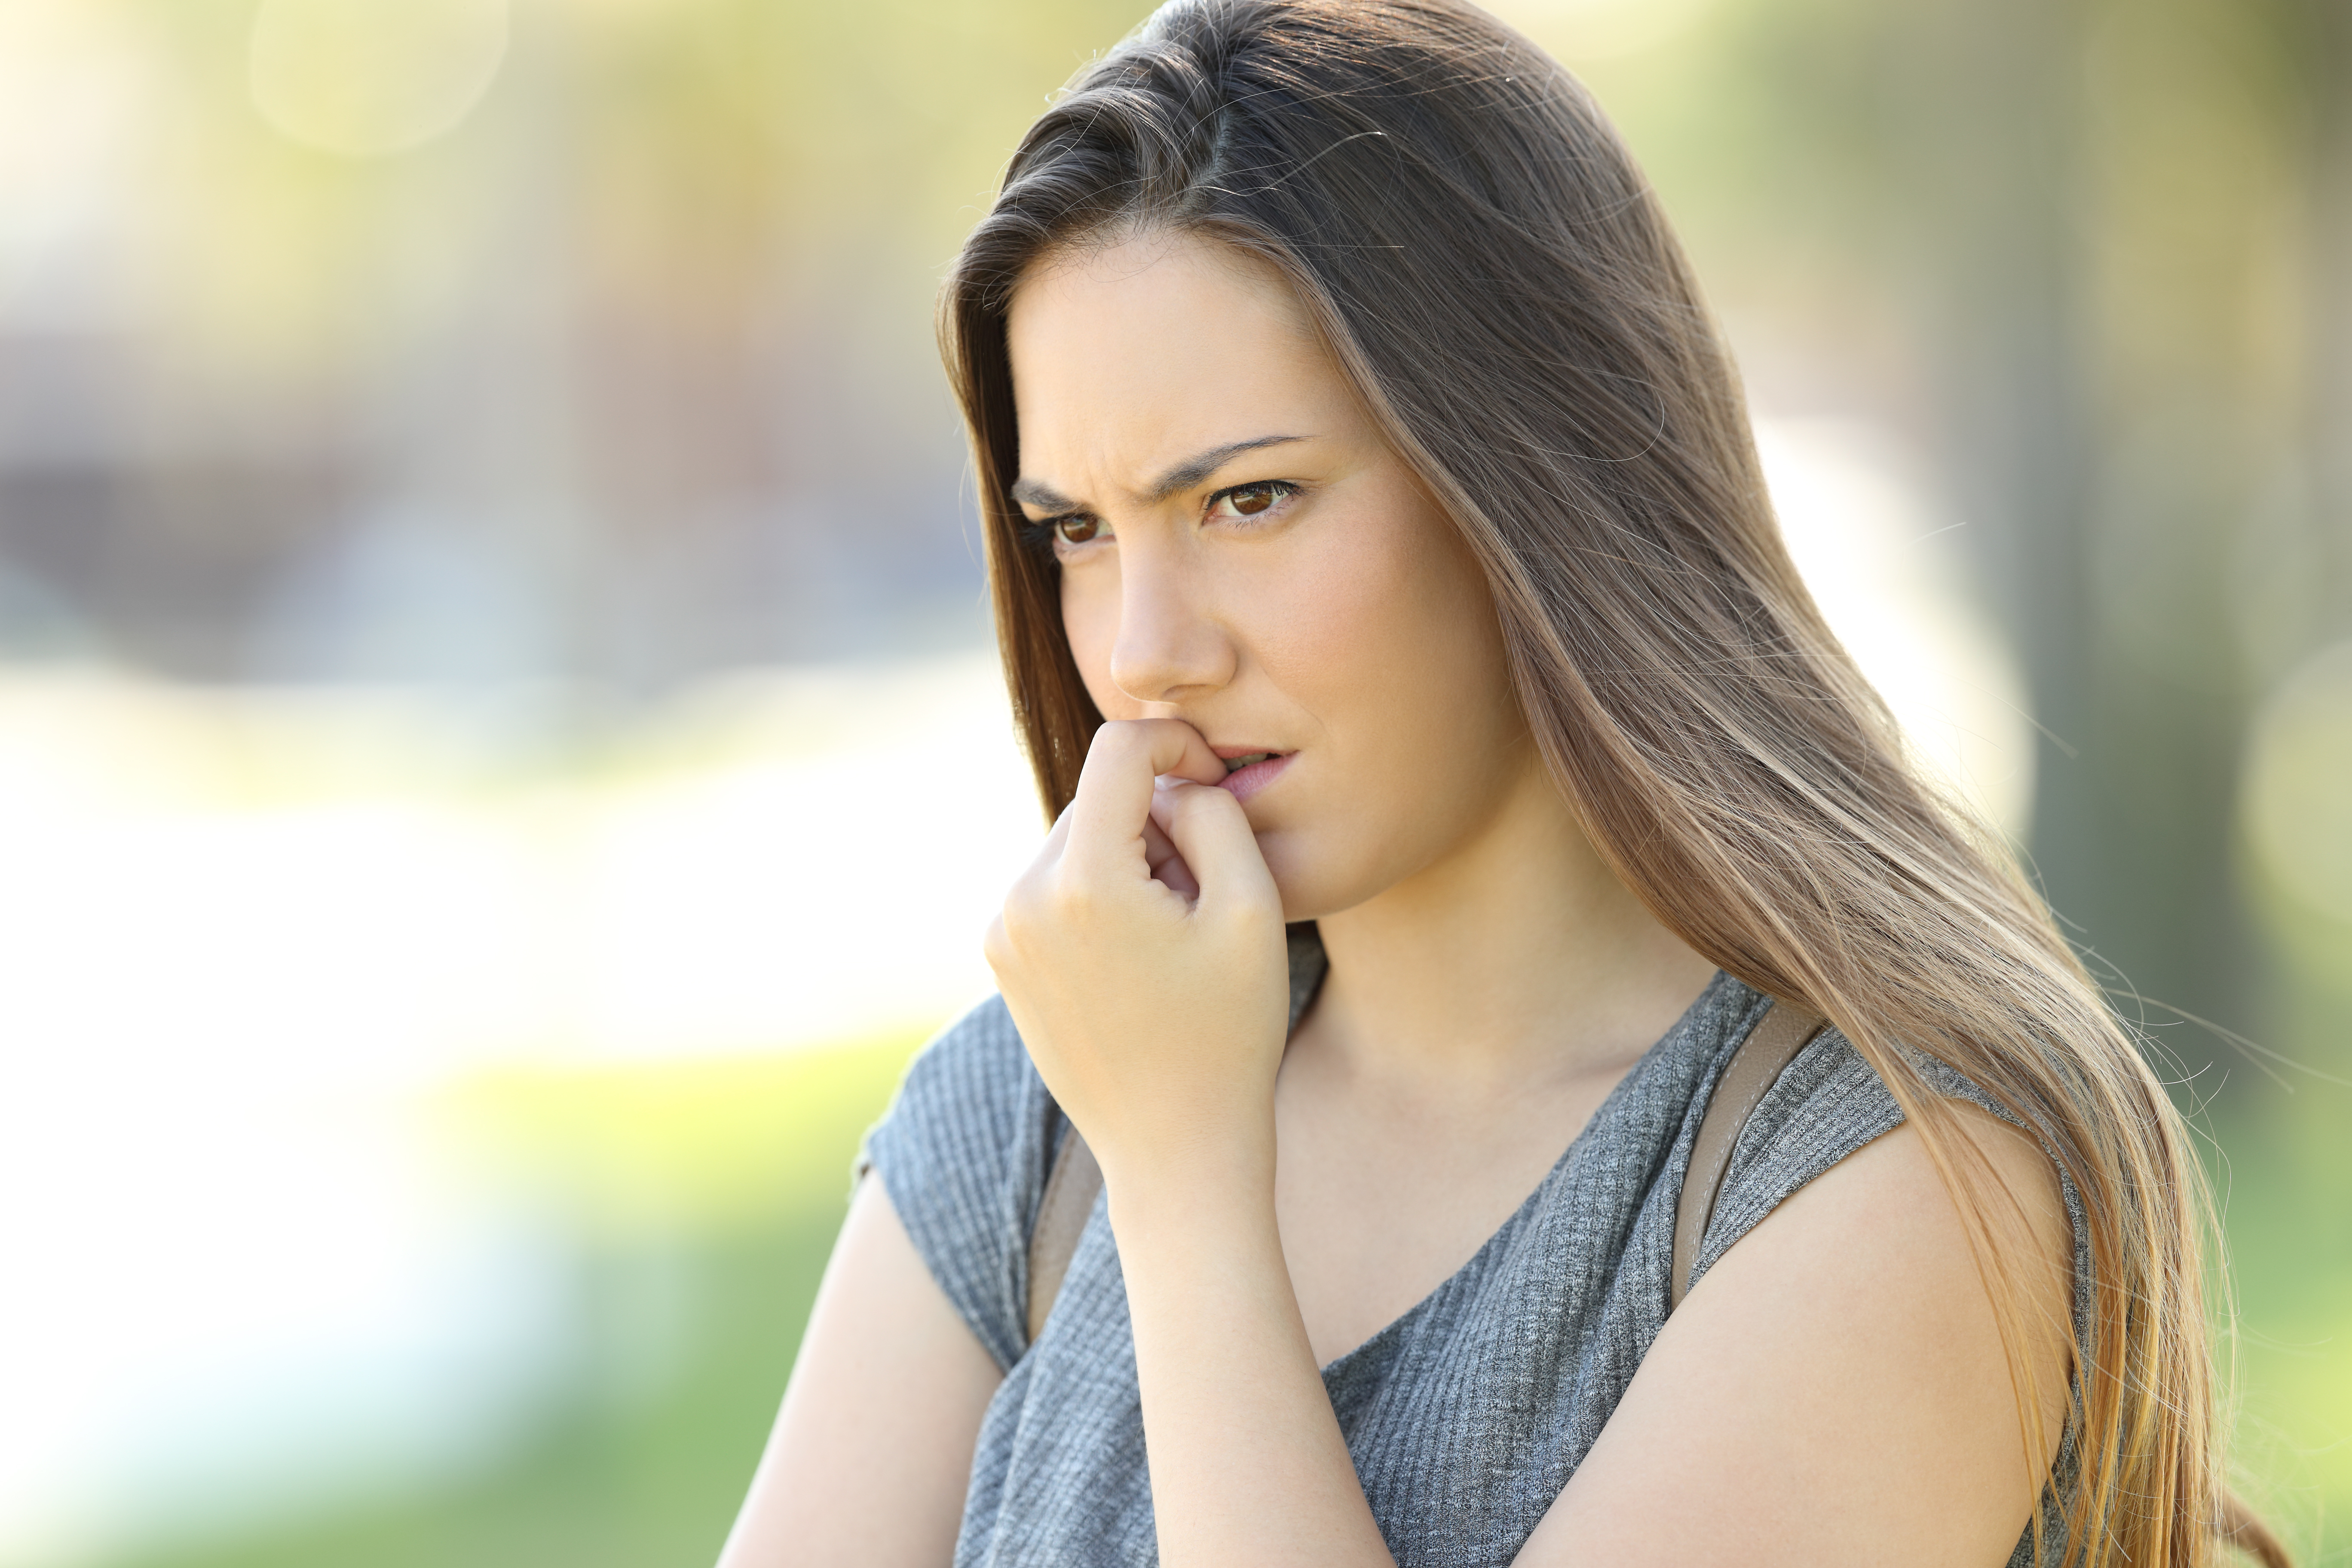 A young woman looking worried | Source: Shutterstock